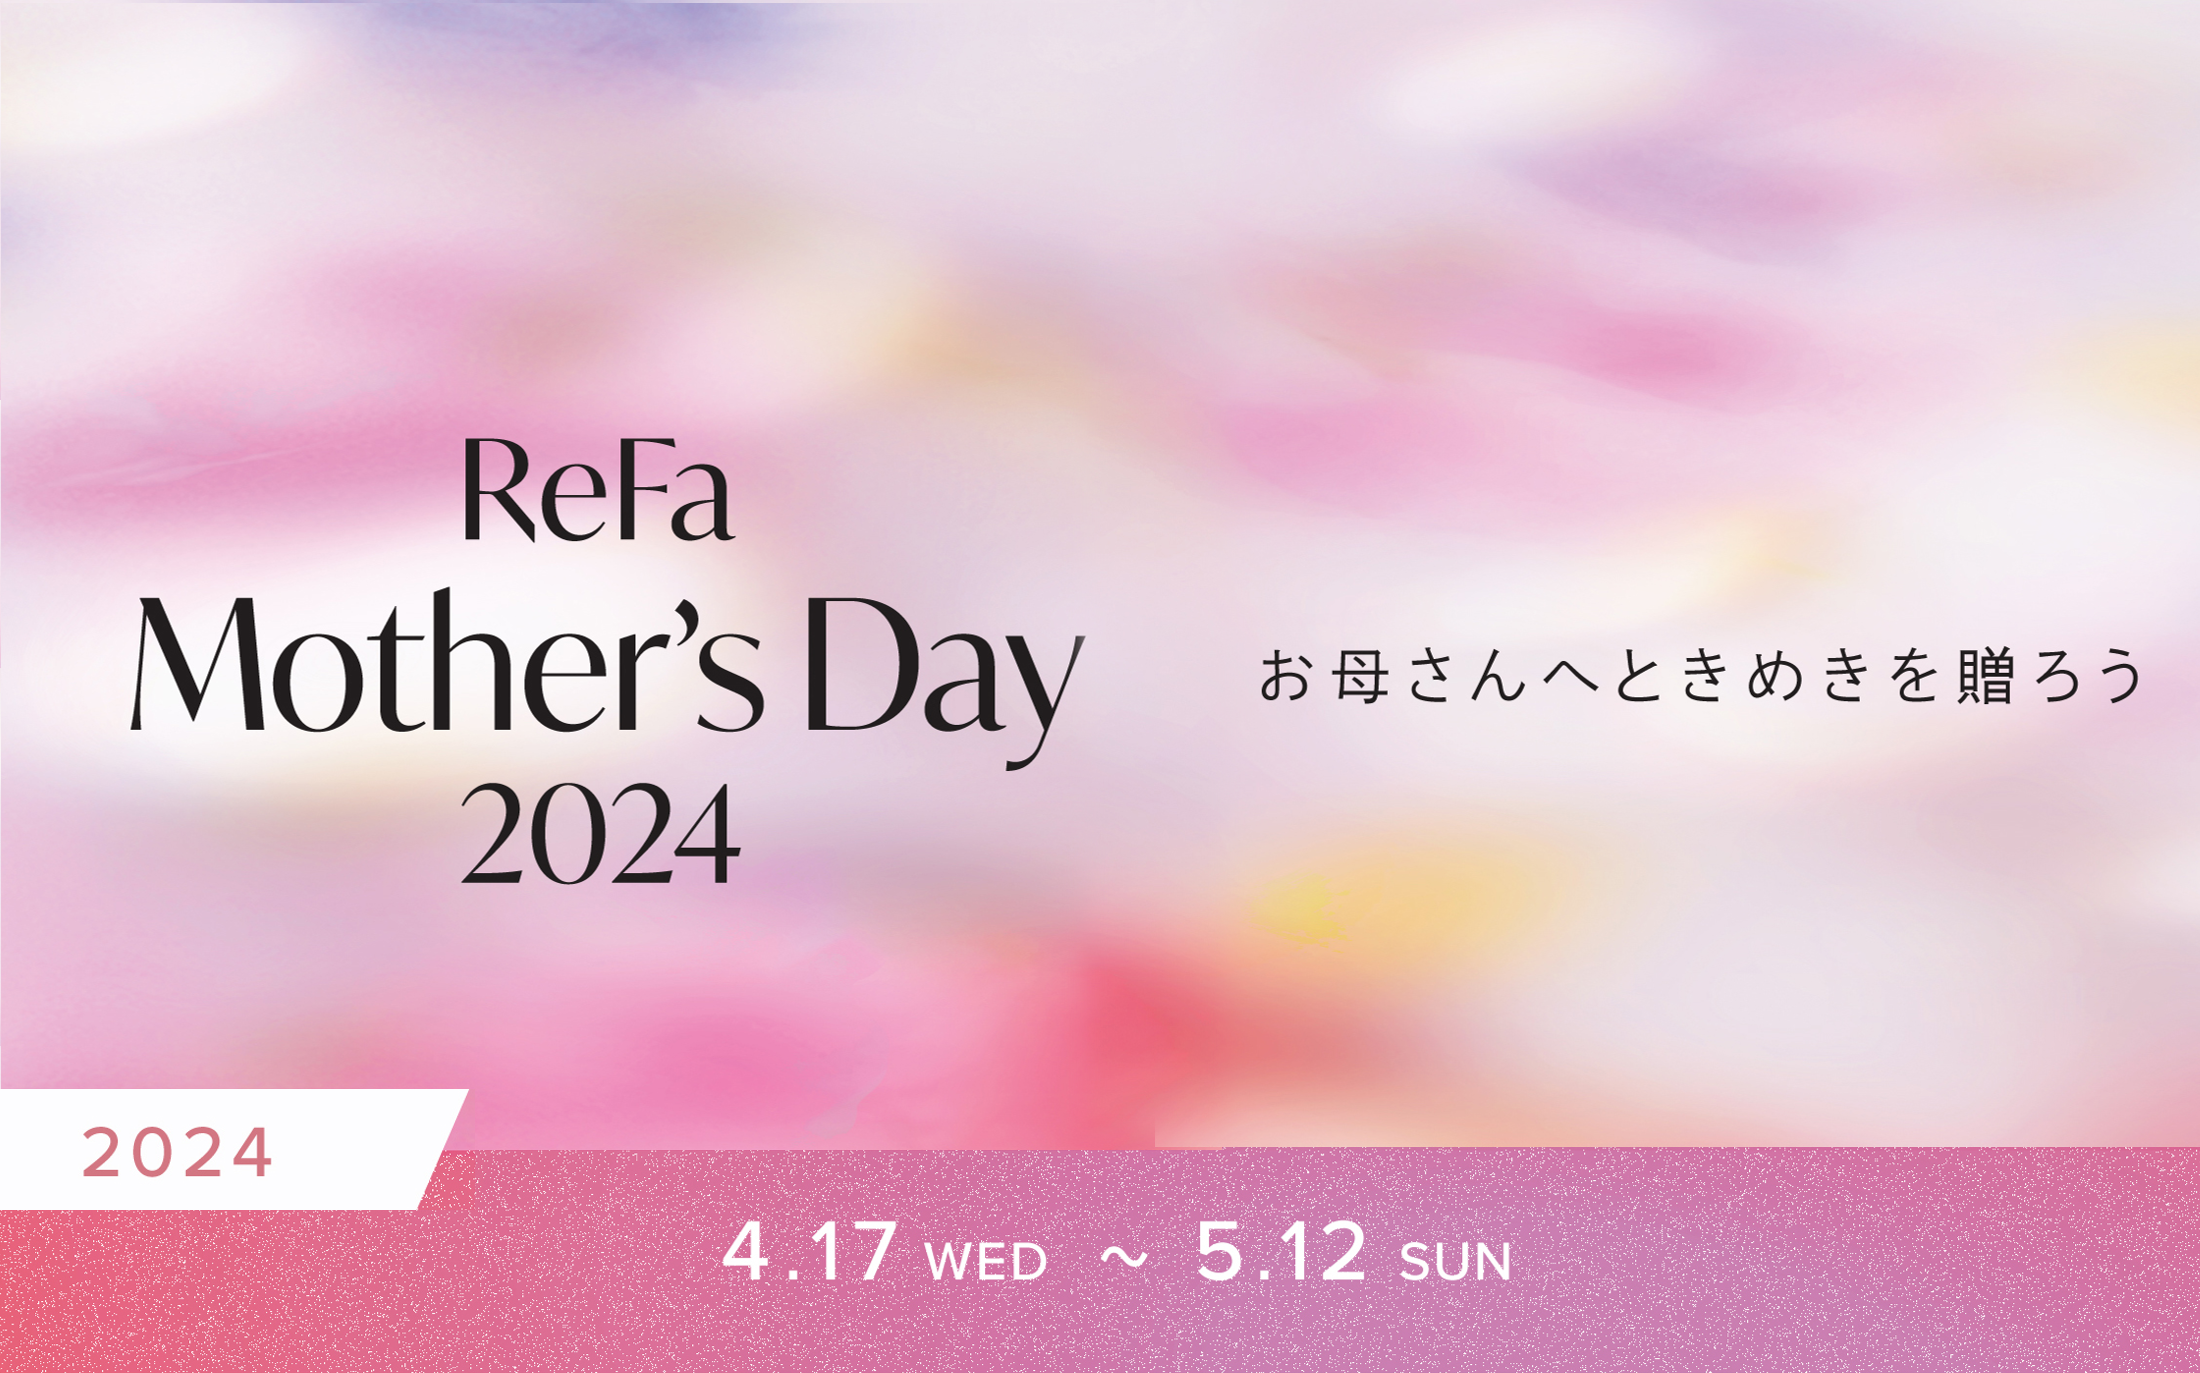 【ReFa Mother's Day】対象のセットご購入でアイロンポーチプレゼント